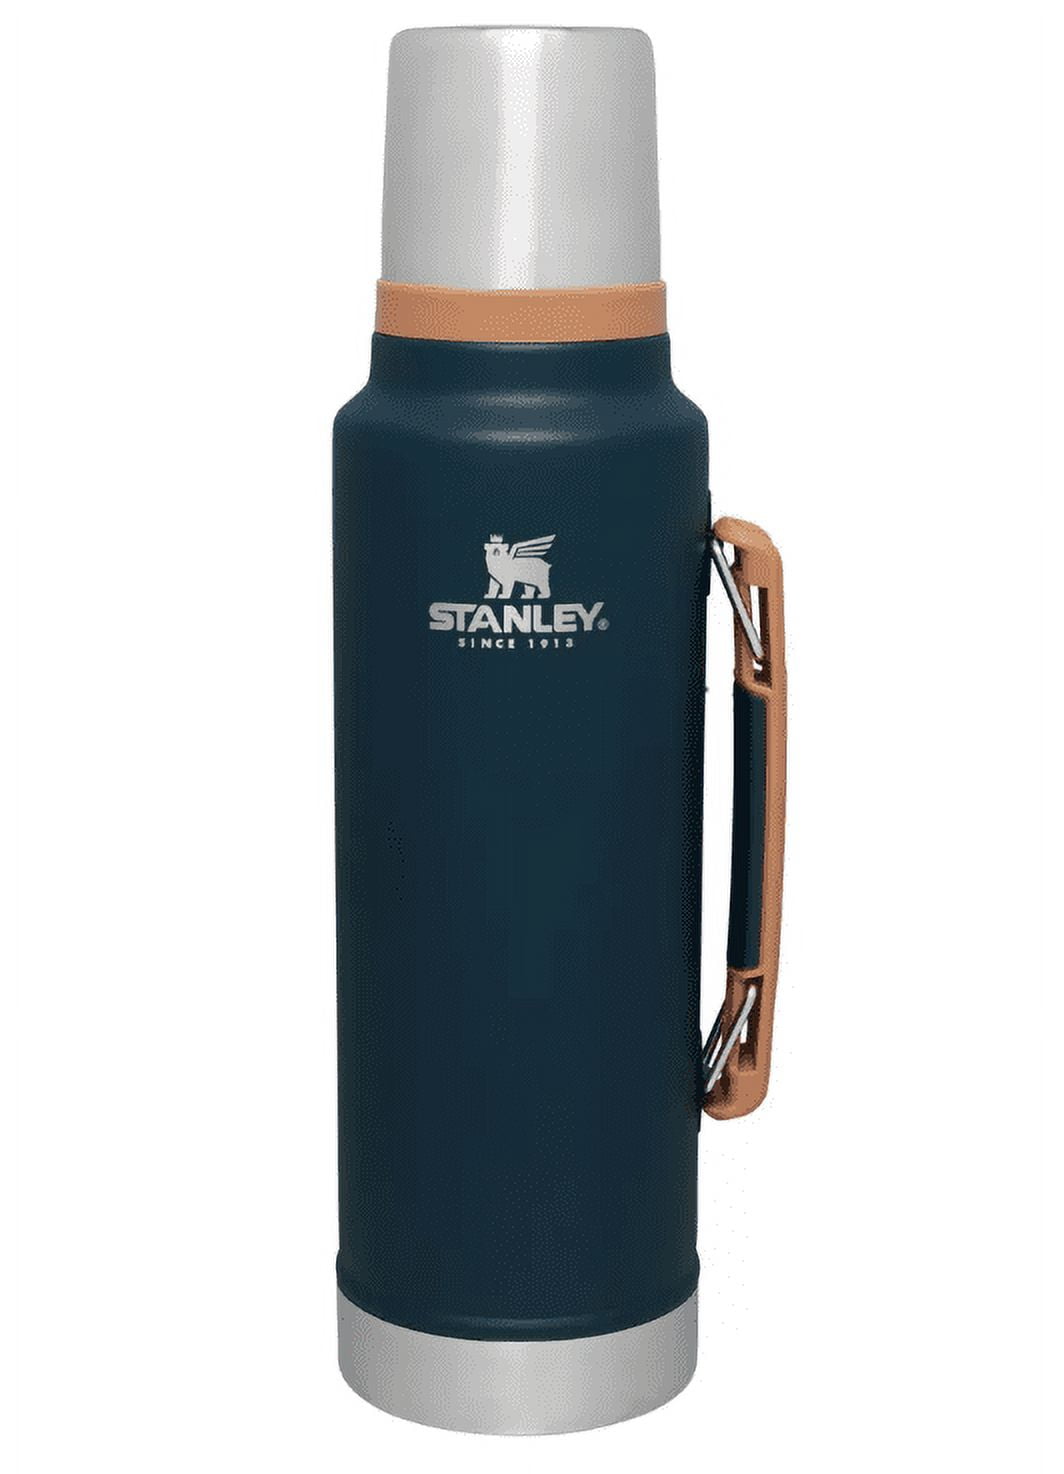 The Thoughtful Gardener Insulated Stainless Steel Water Bottle 23.5 oz